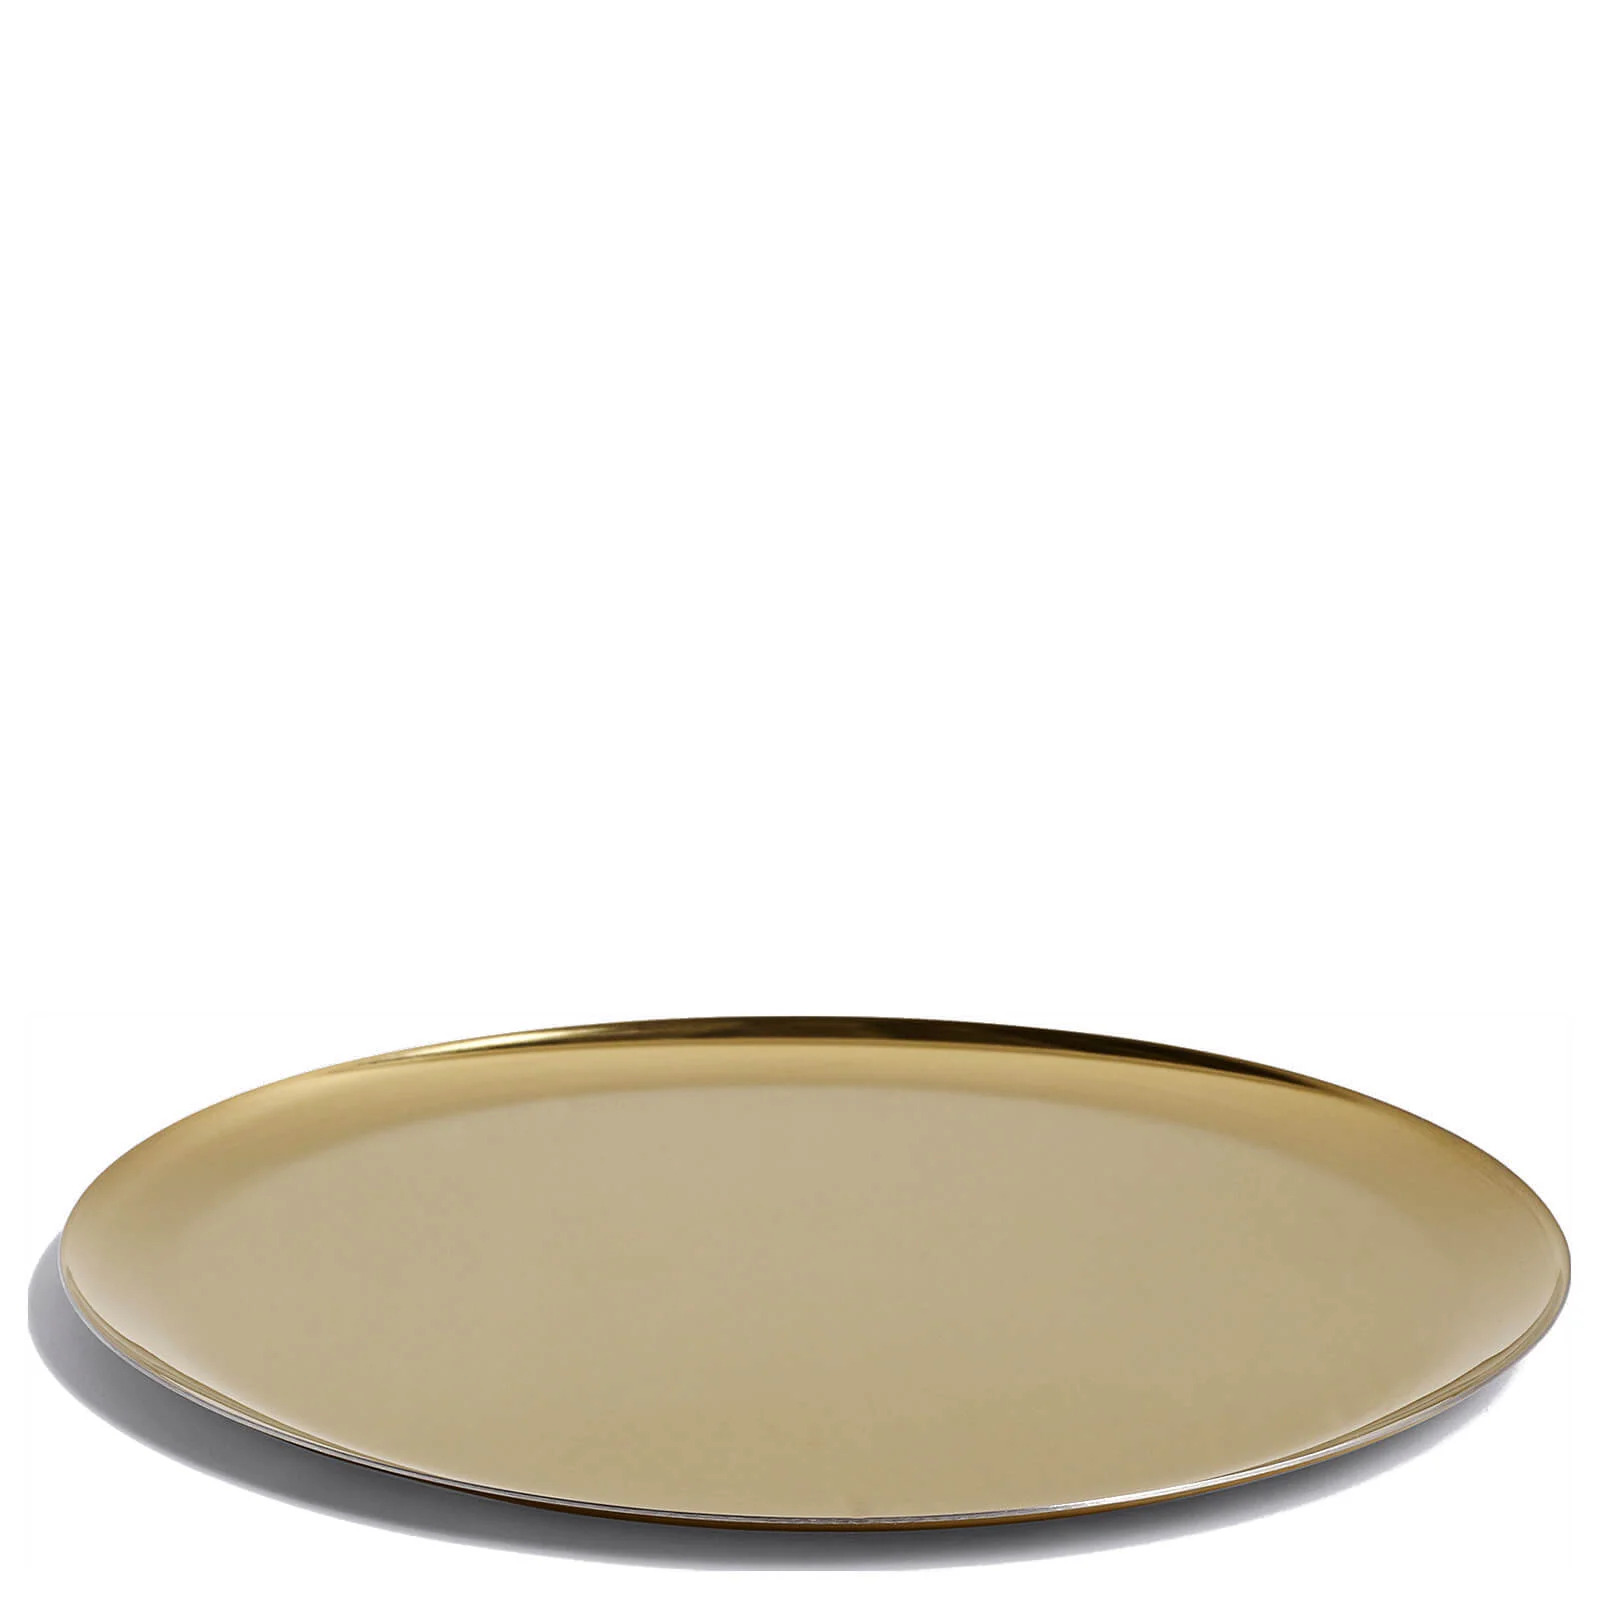 HAY Serving Tray - Golden Image 1